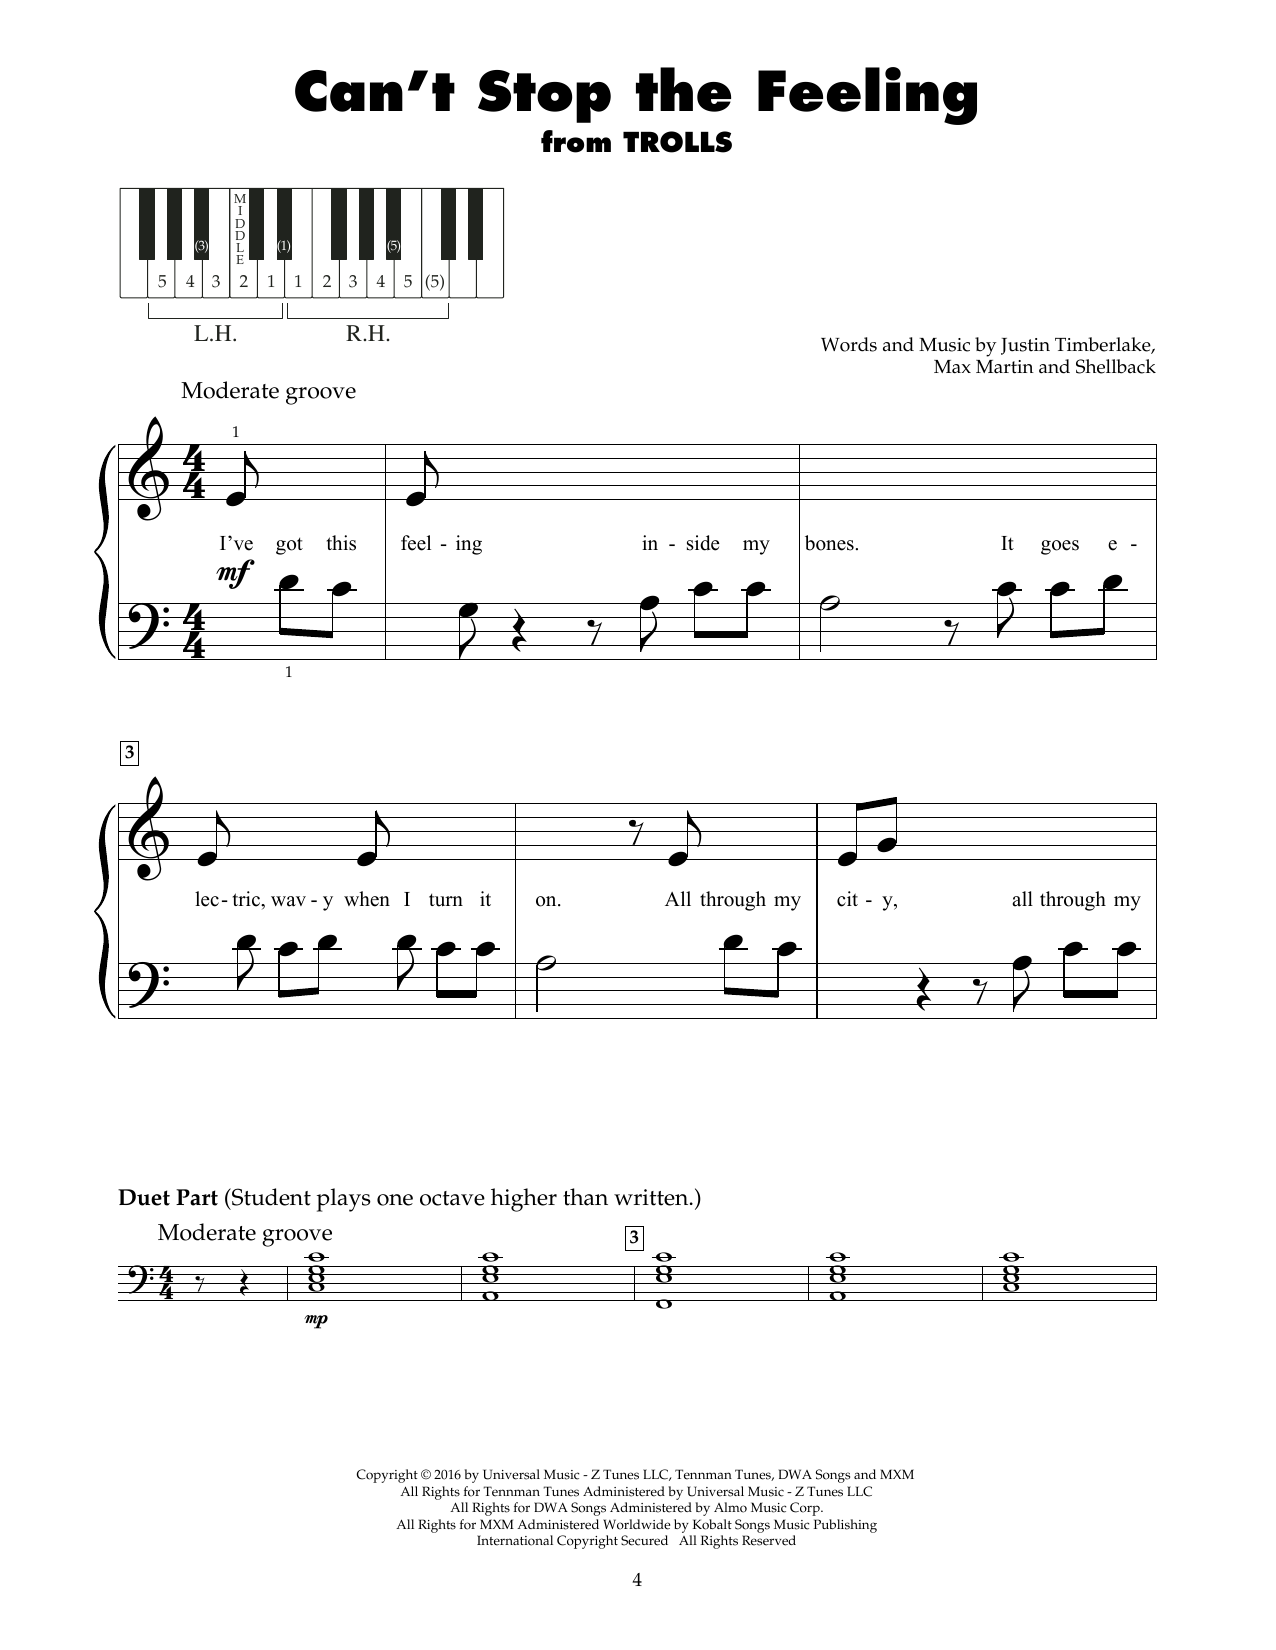 Download Justin Timberlake Can't Stop The Feeling! Sheet Music